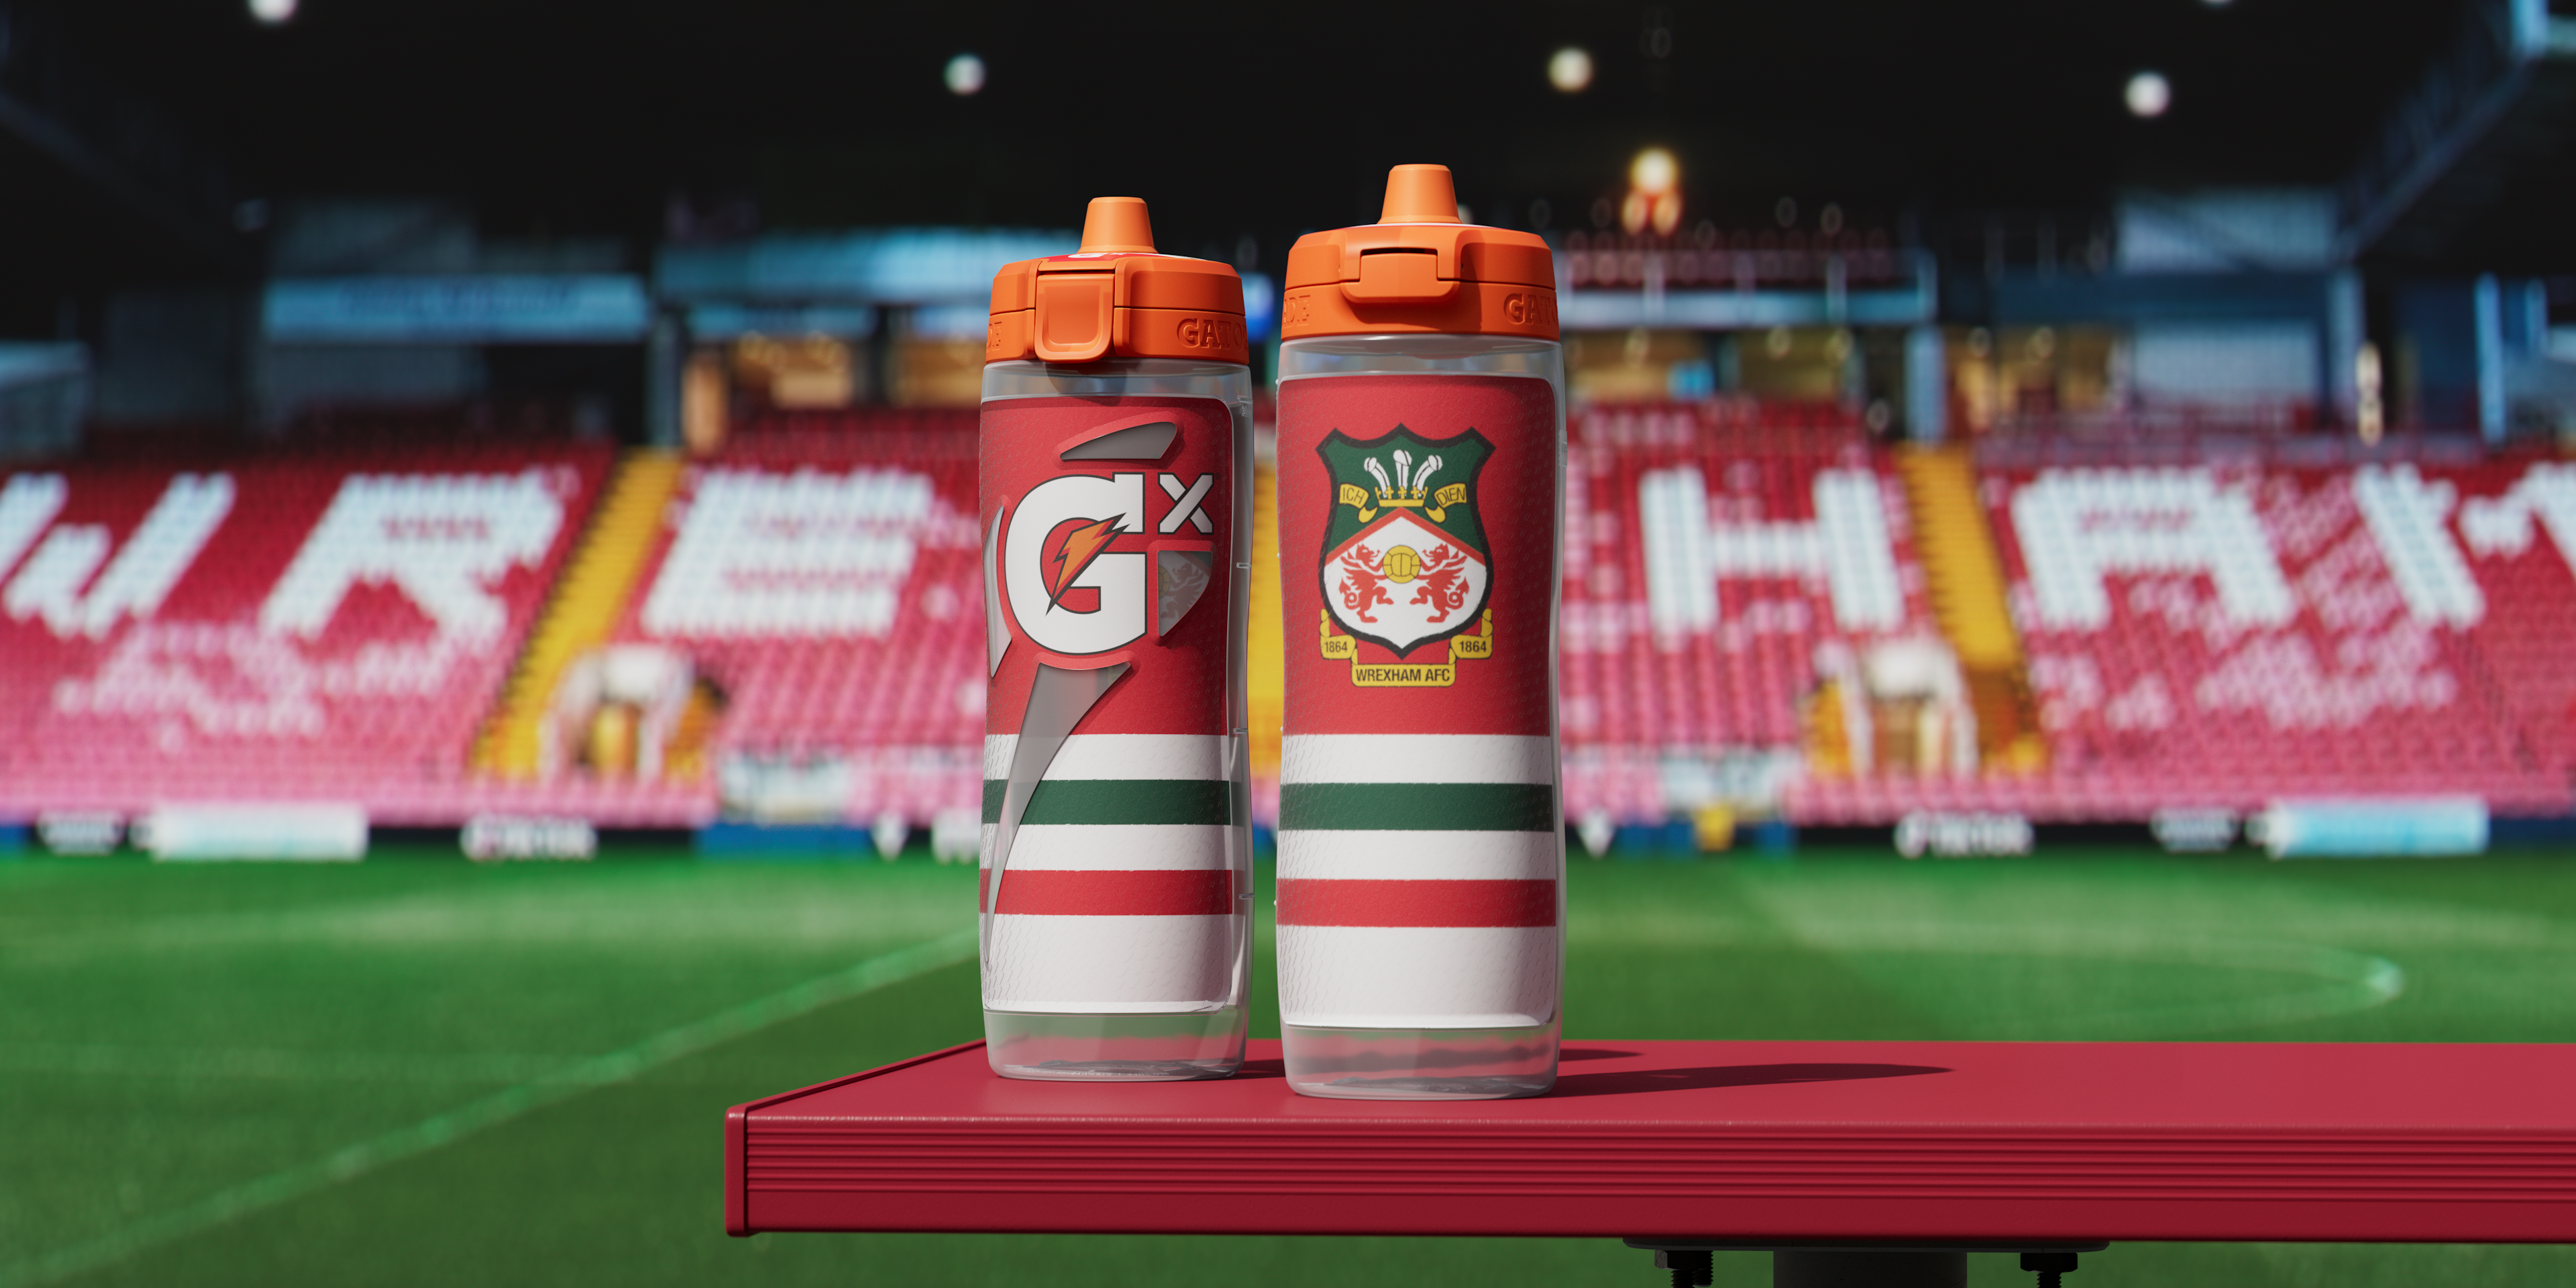 Wrexham bottles front and back on bench beside a field